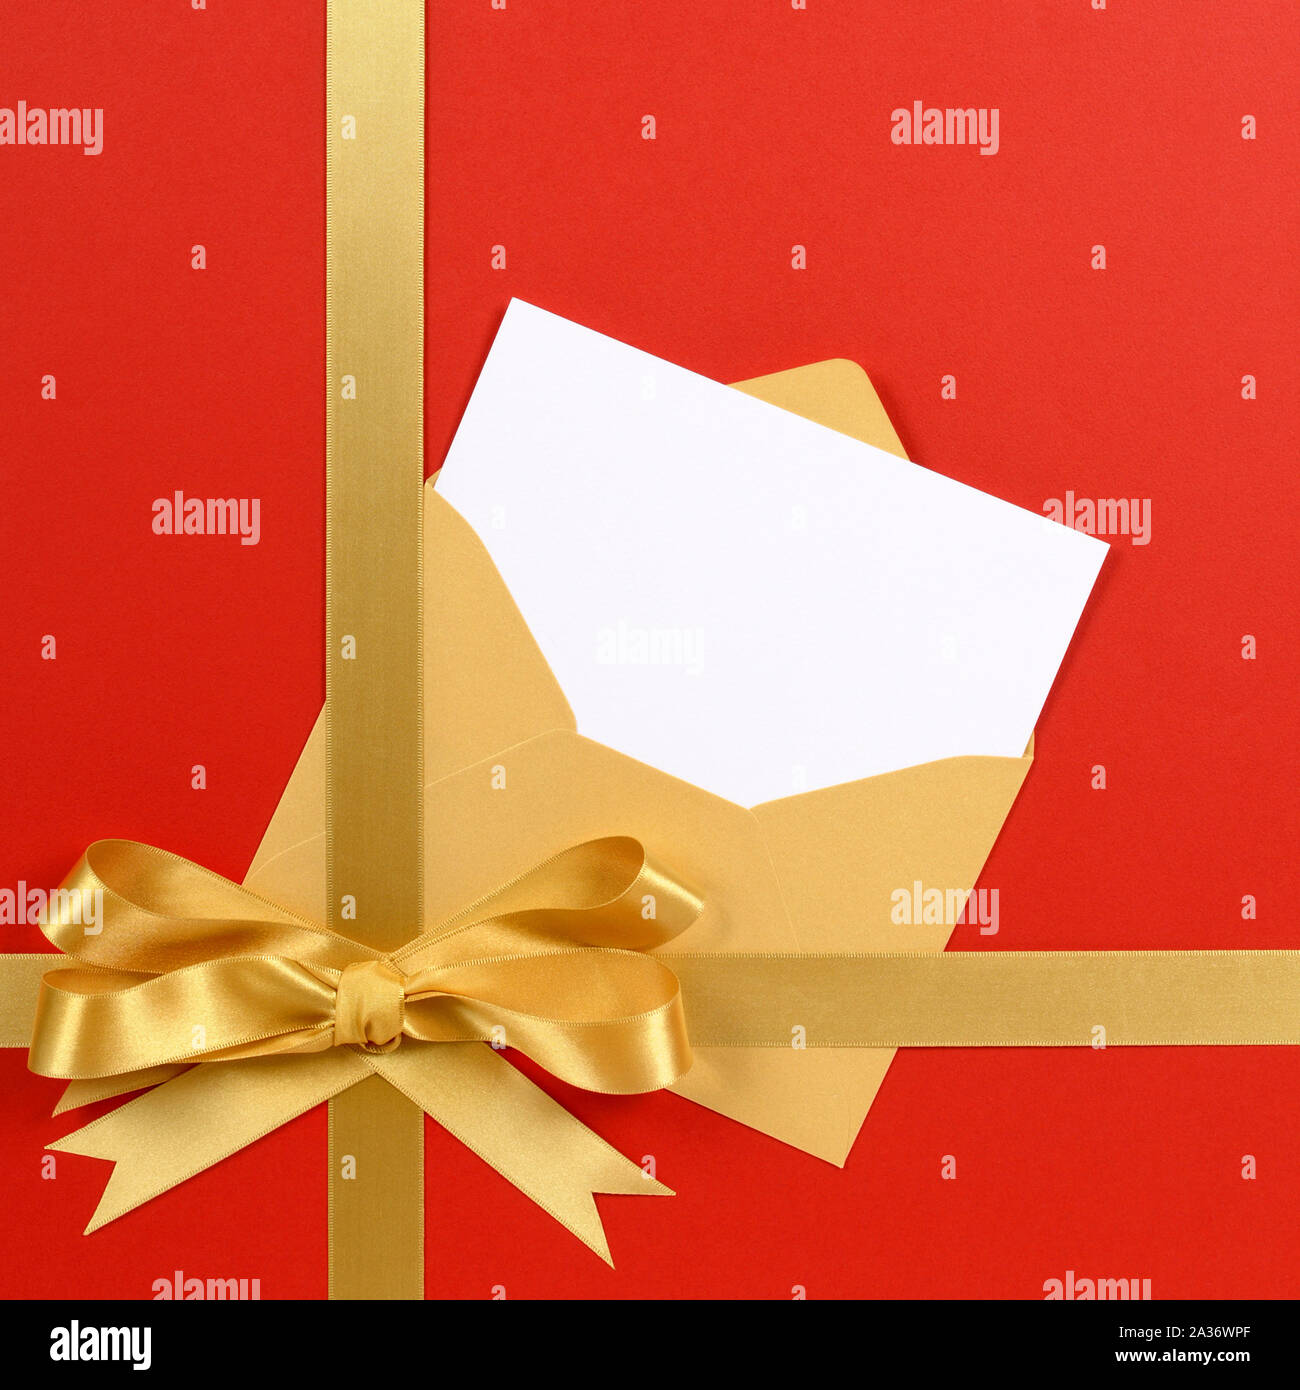 Red and gold gift with blank invitation or greetings card. Stock Photo